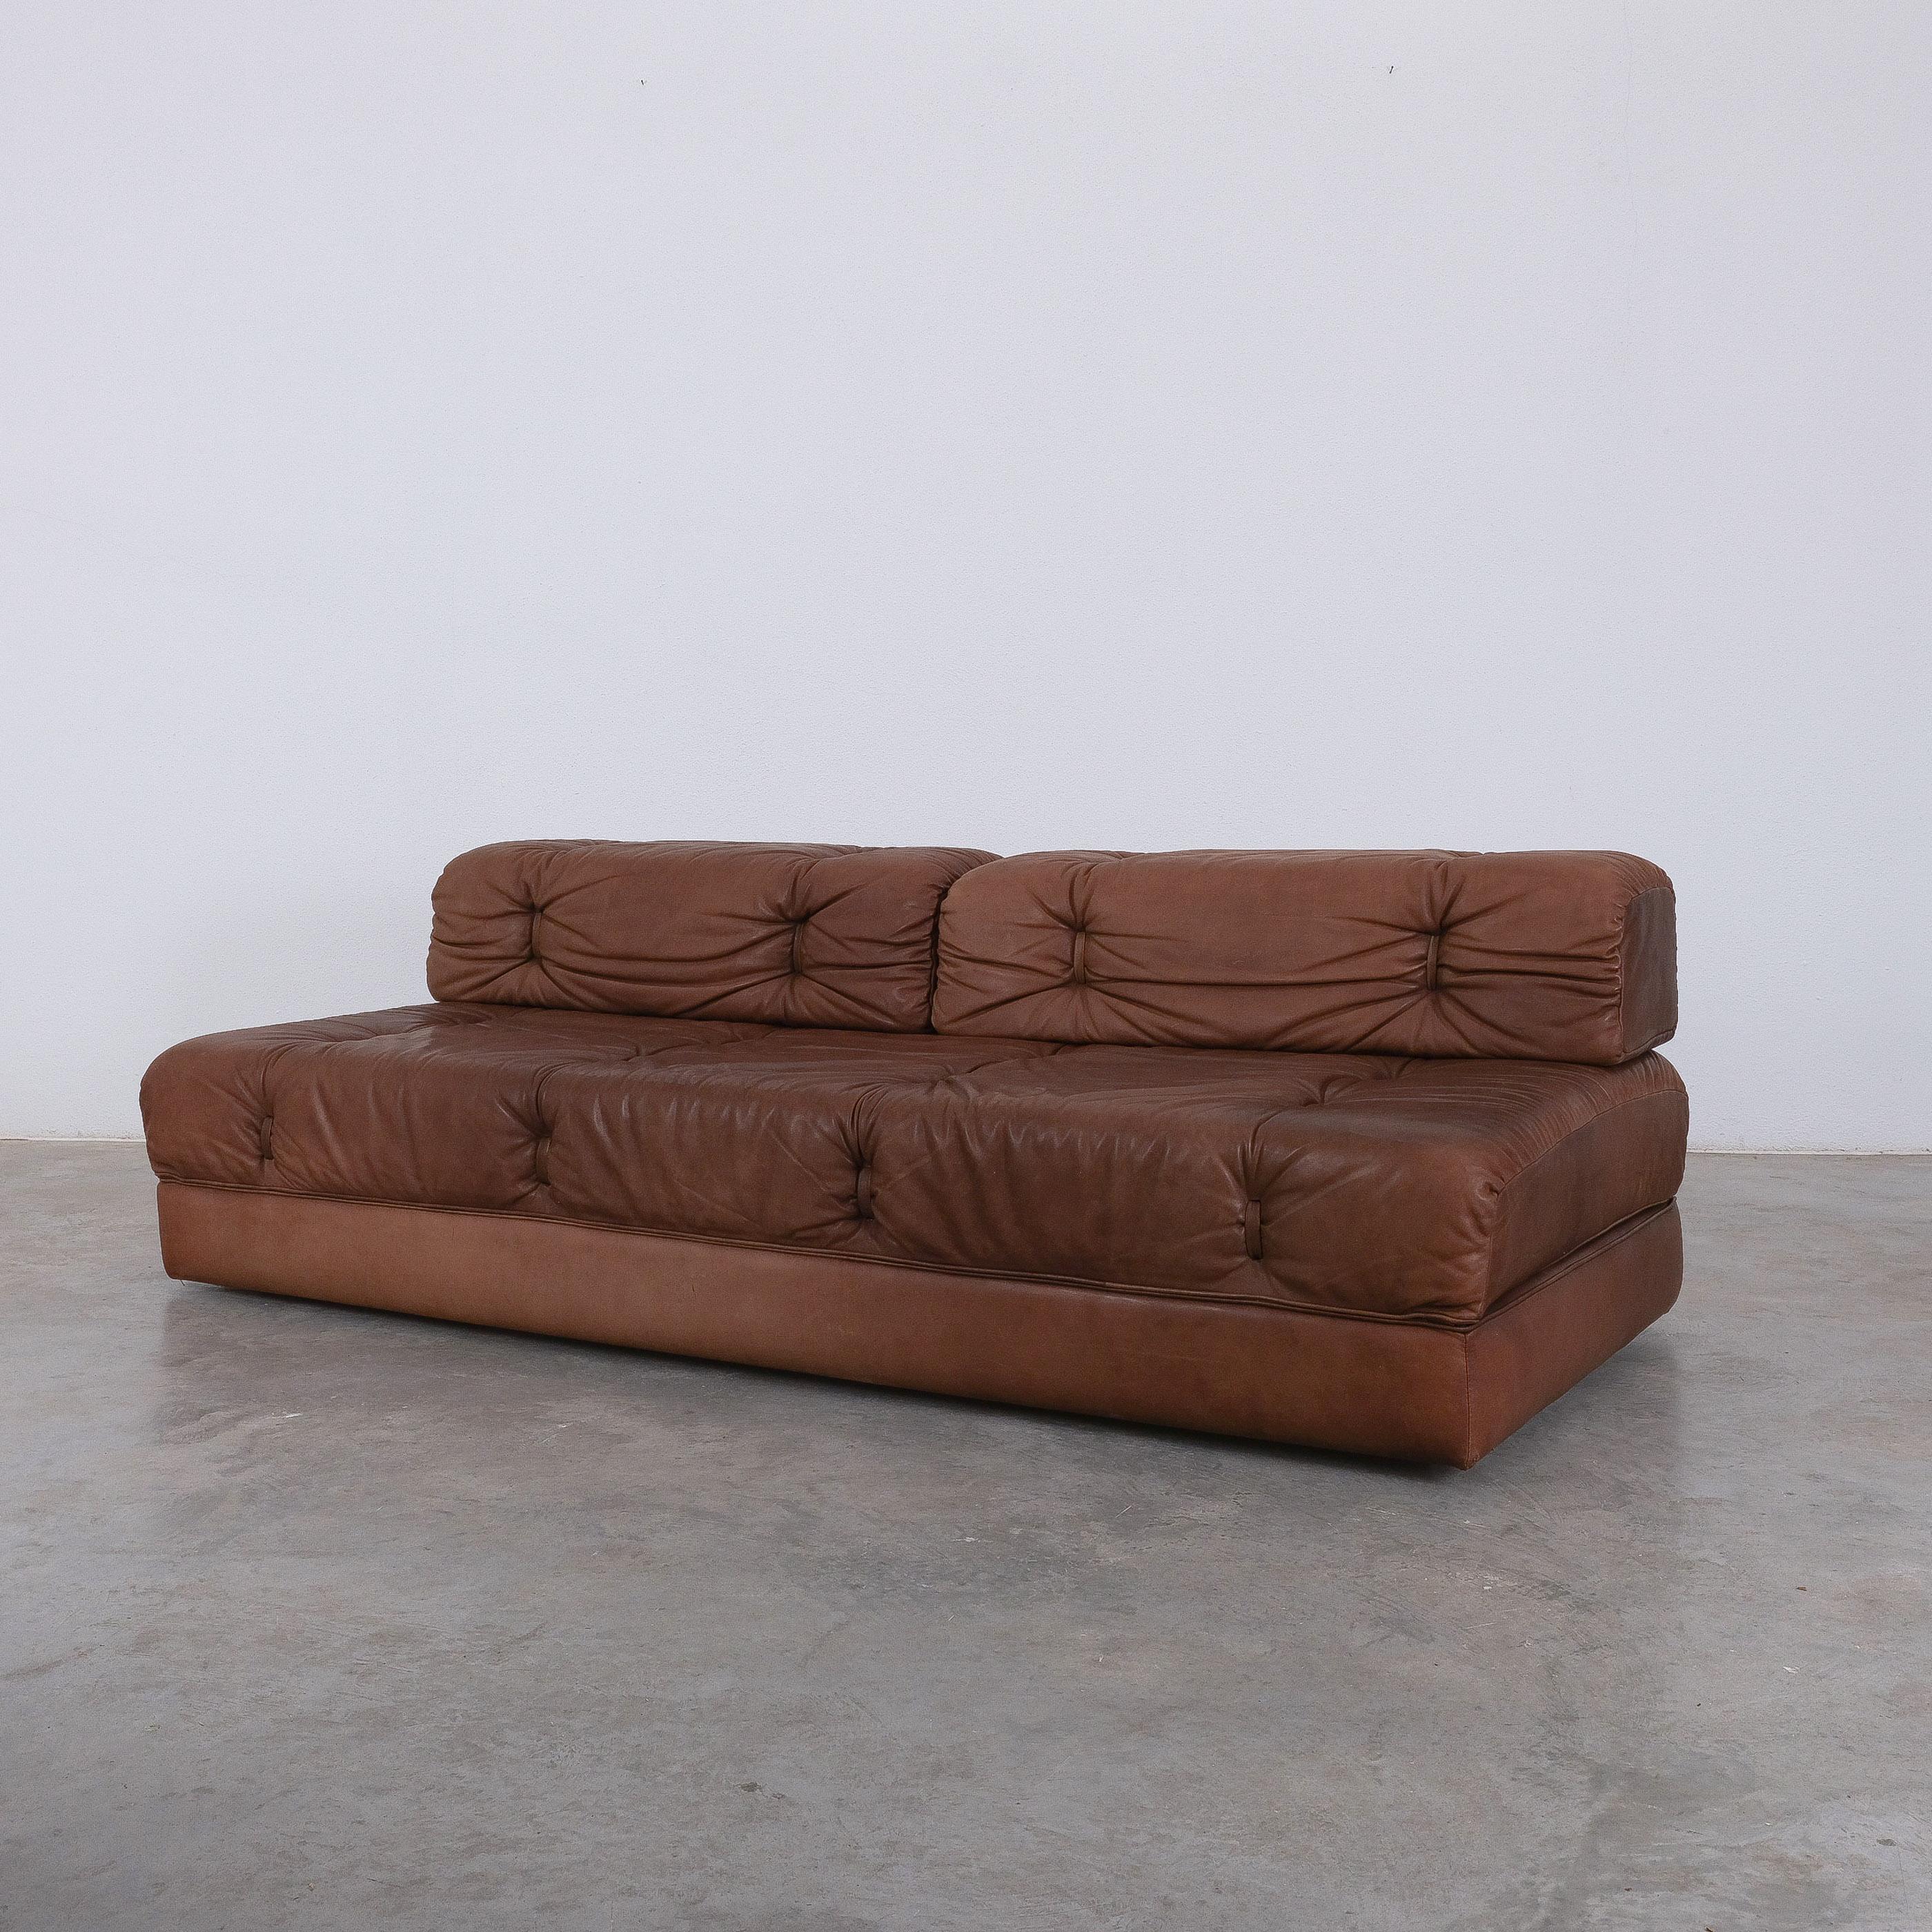 Brown leather bed- sofa Karl Wittmann‚ Atrium’  in original brown leather, Austria, circa 1970

Very well preserved convertible double-seat sofa by Karl Wittmann in original condition. The 'Atrium' was produced in the same era and style as many